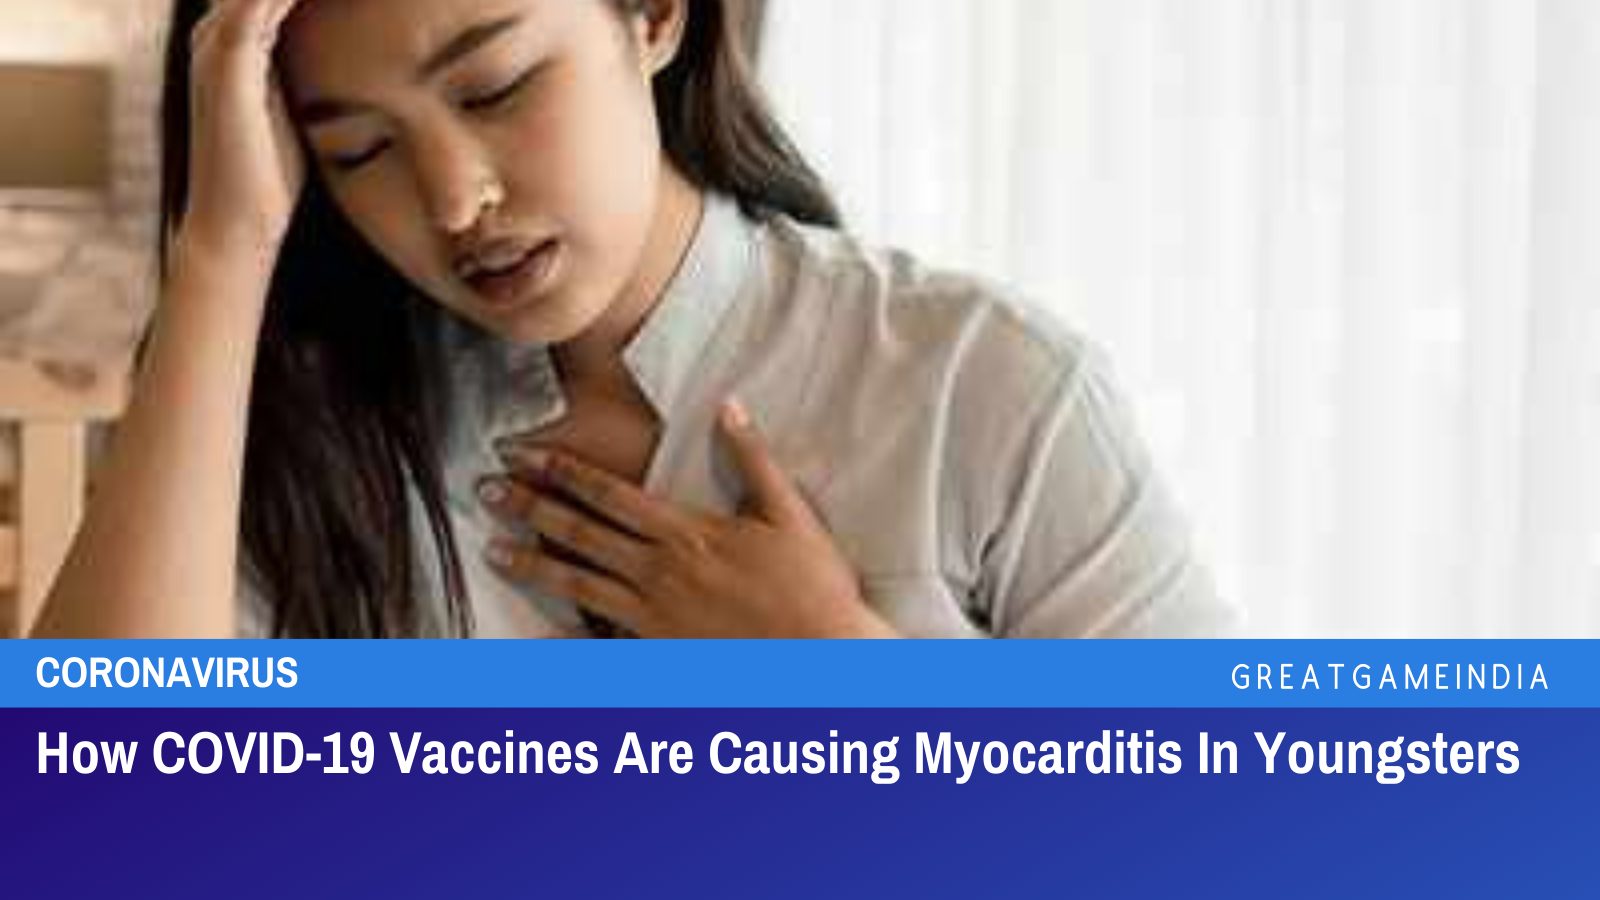 How COVID-19 Vaccines Are Causing Myocarditis In Youngsters